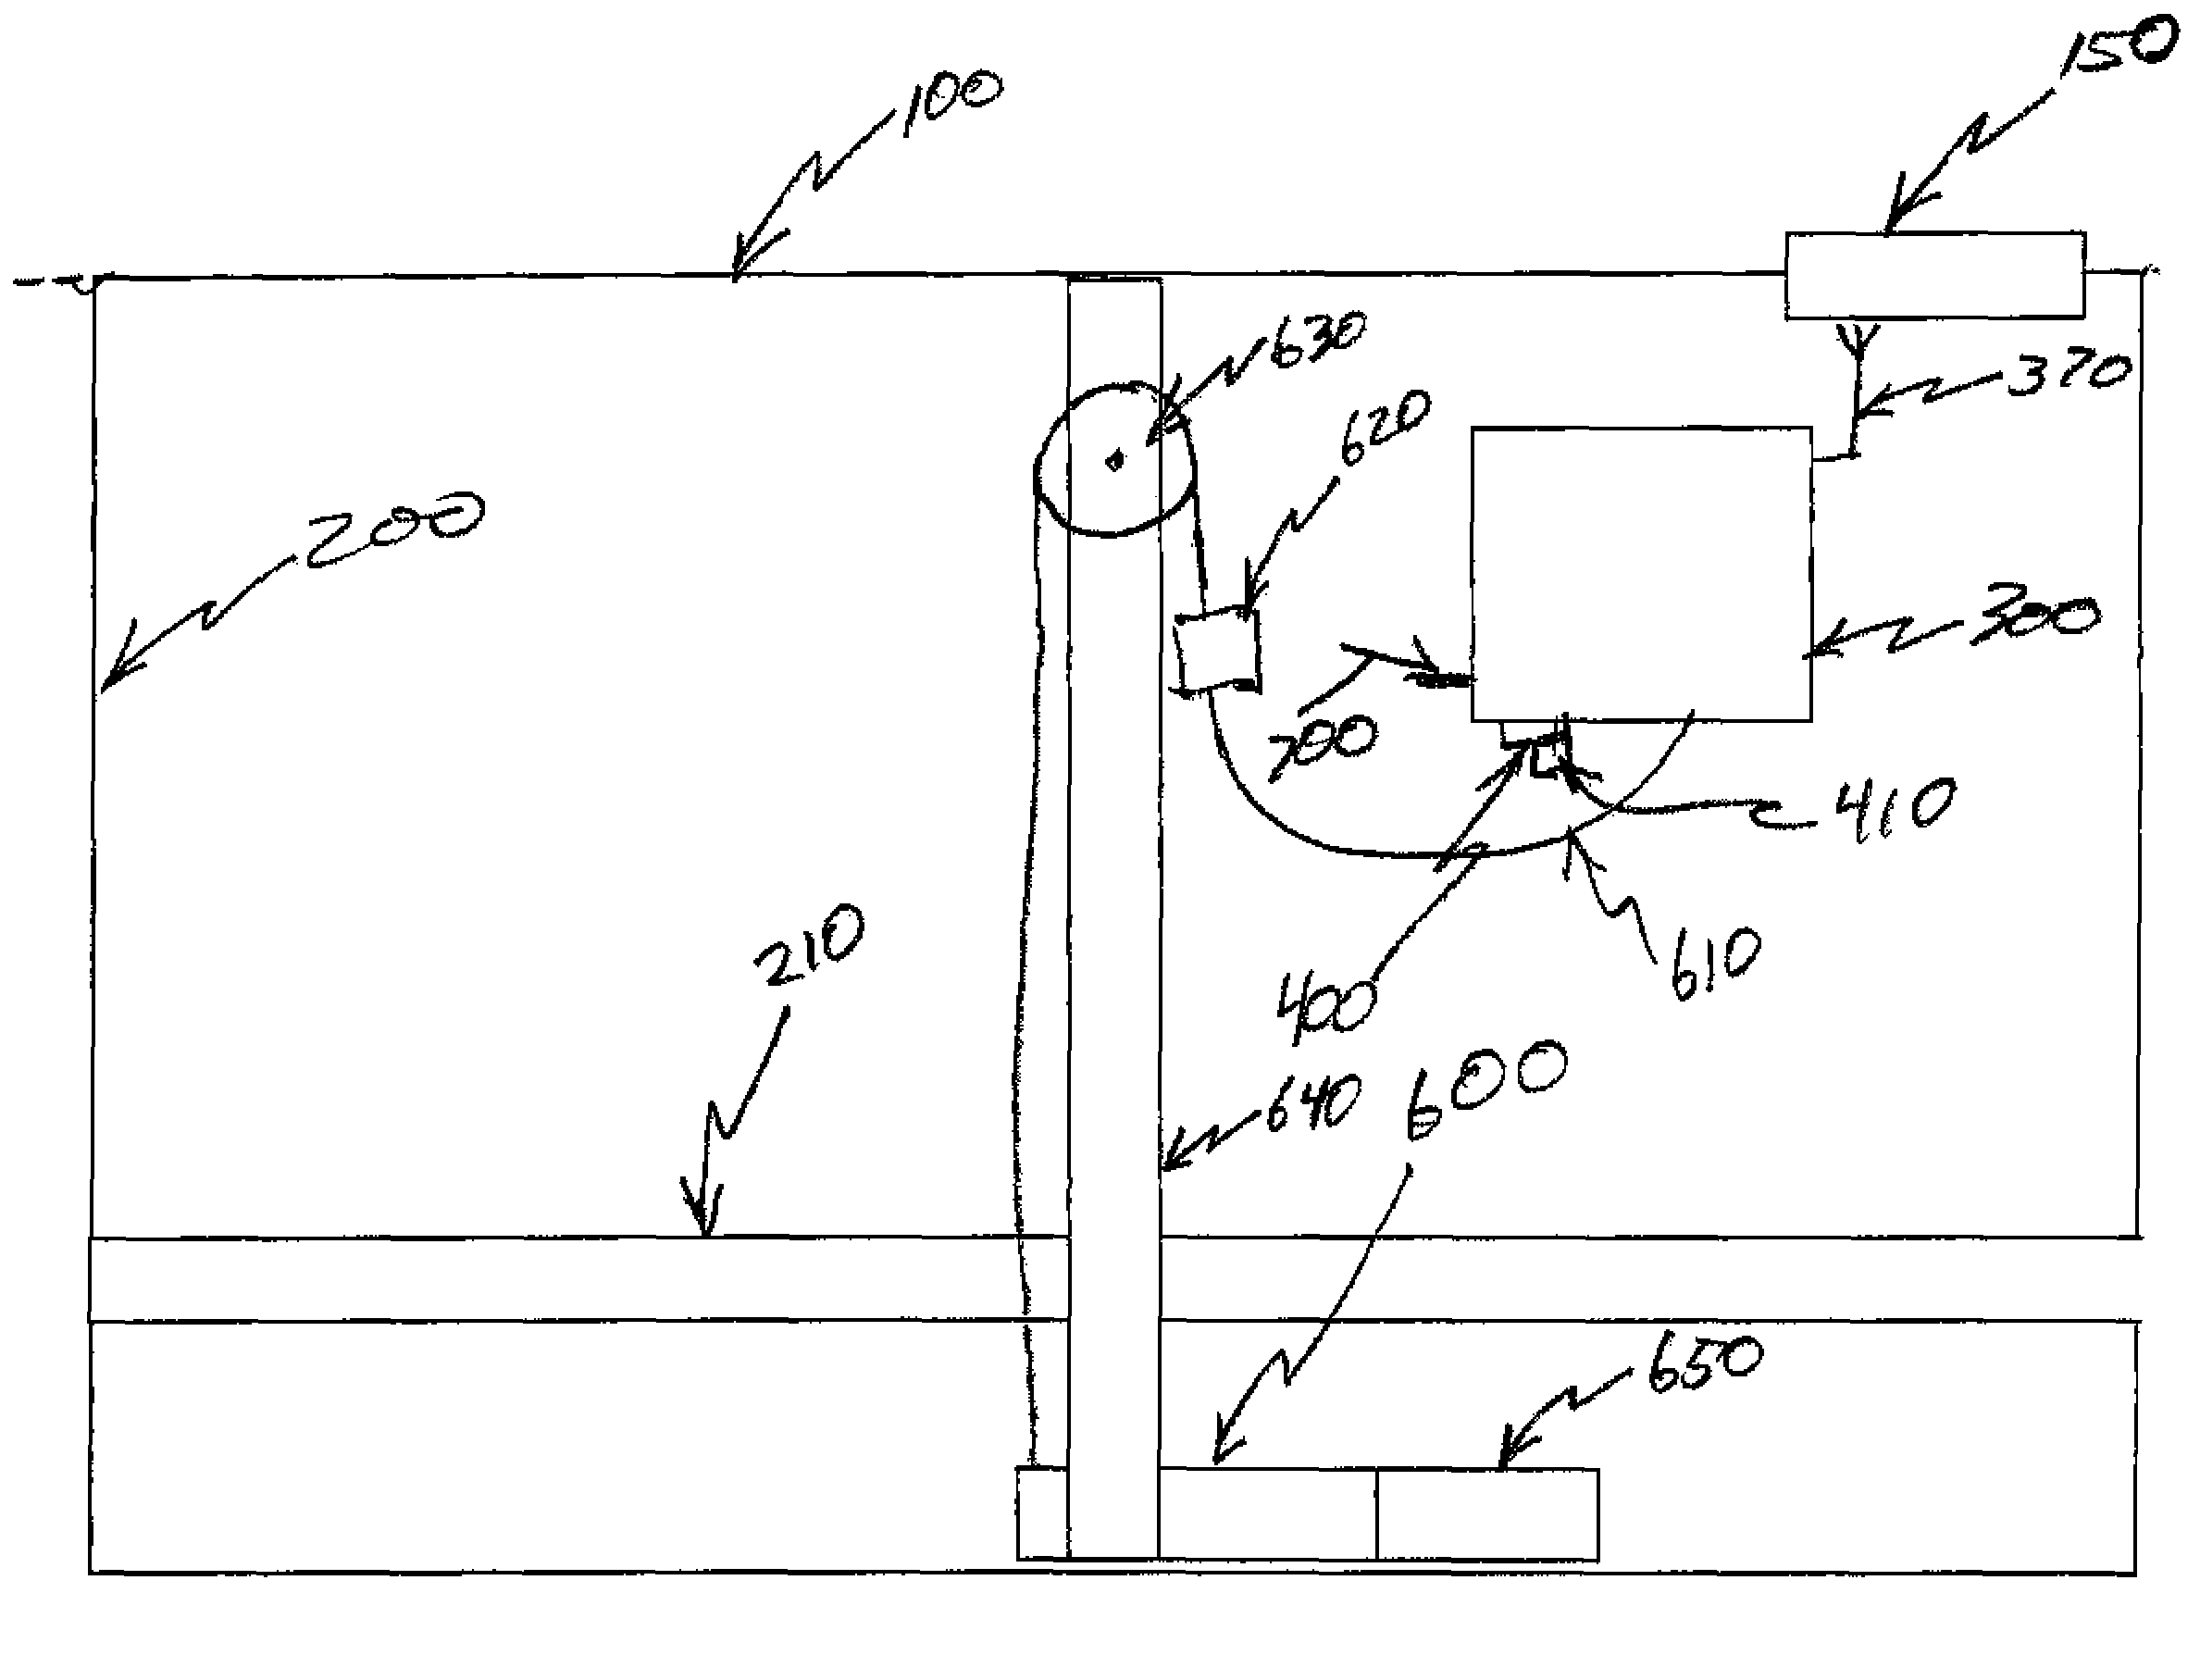 Fluid monitoring apparatus and method